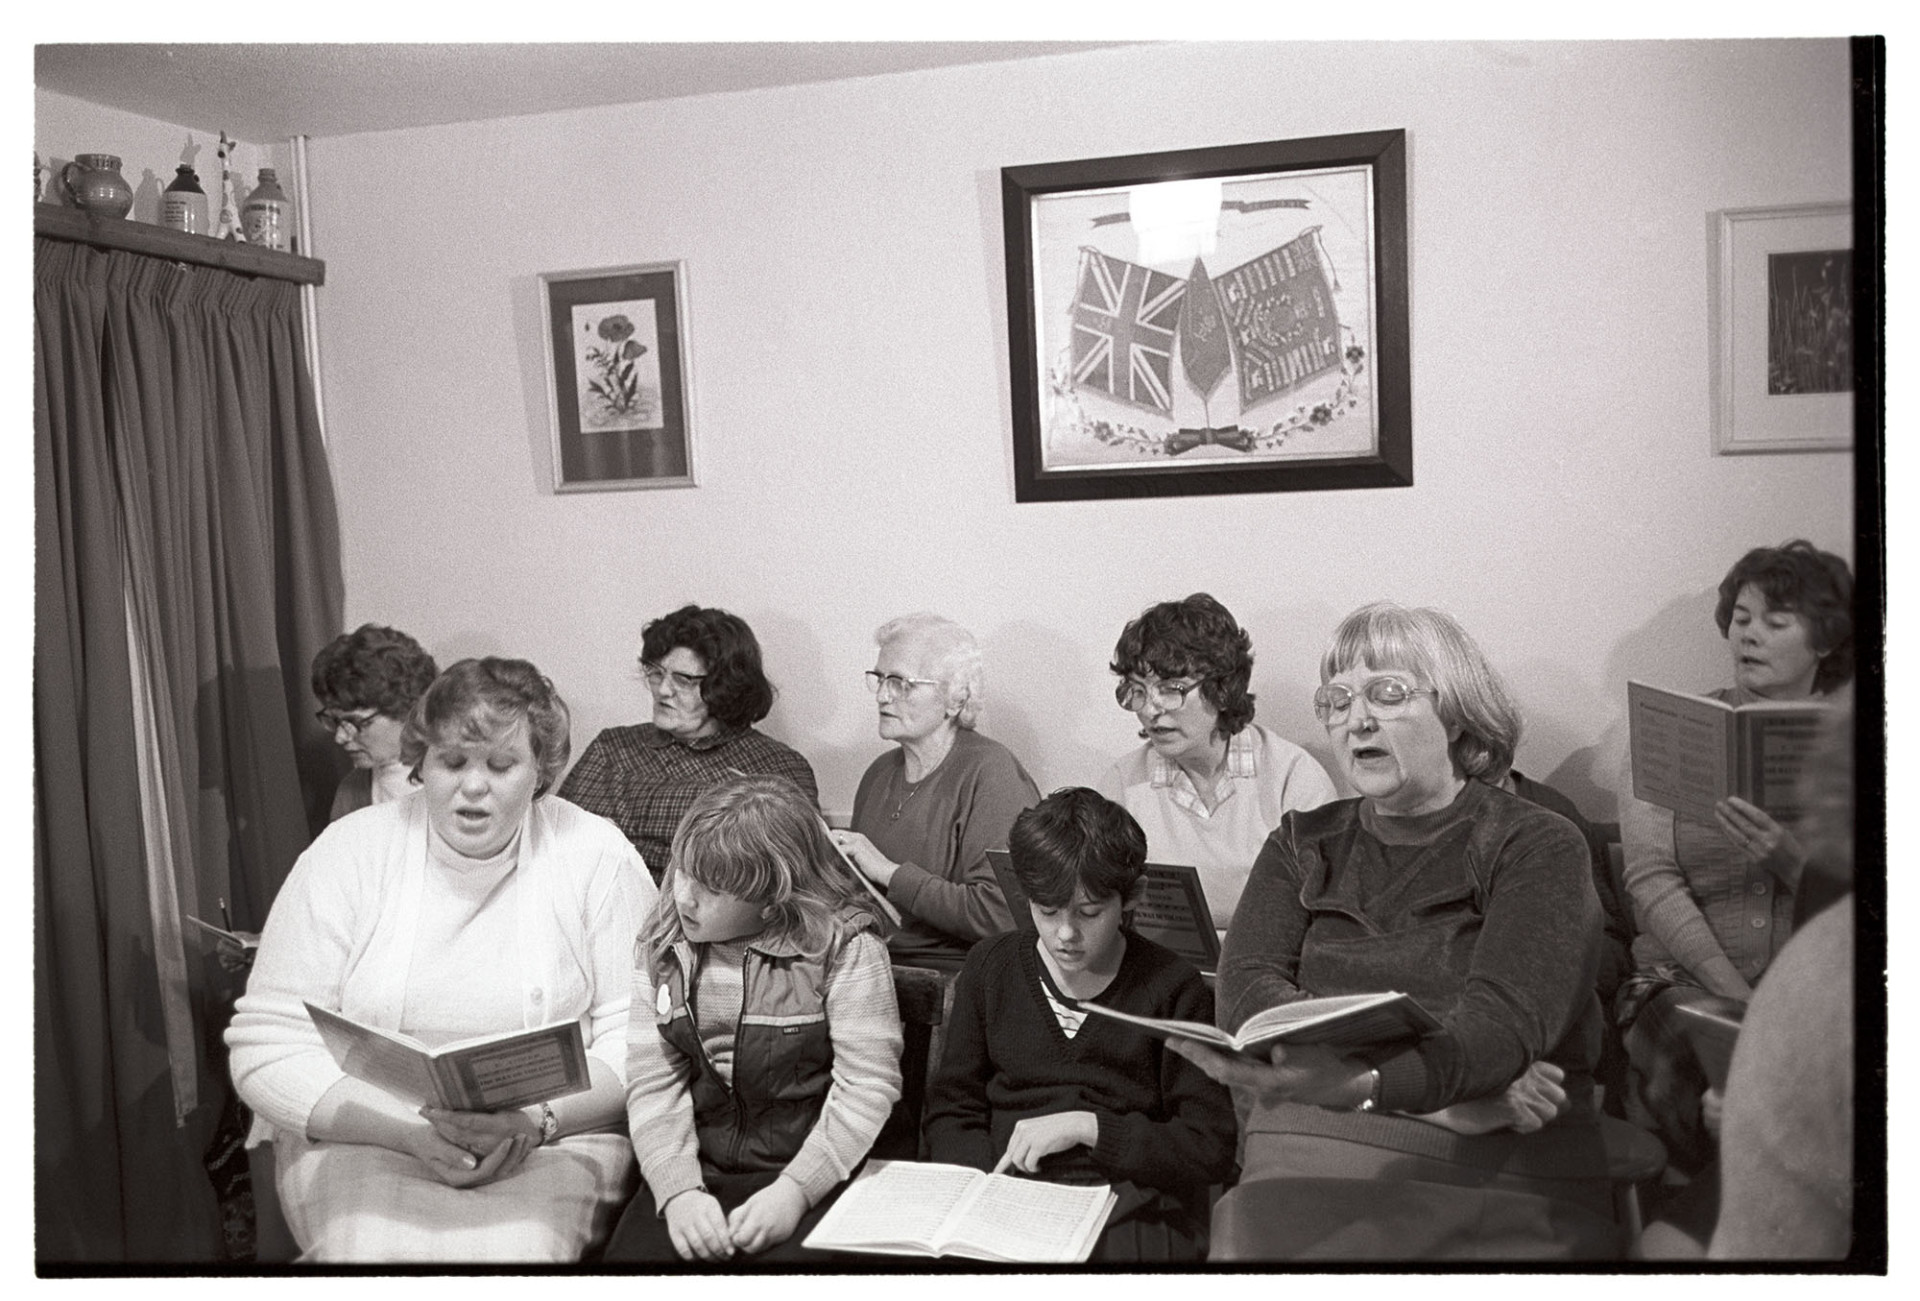 Choir practice in sitting room. Singing. 
[Women and children singing at a choir practice in a living room in a house at St Giles in the Wood. Pictures of a flower and flags are hung on the wall.]